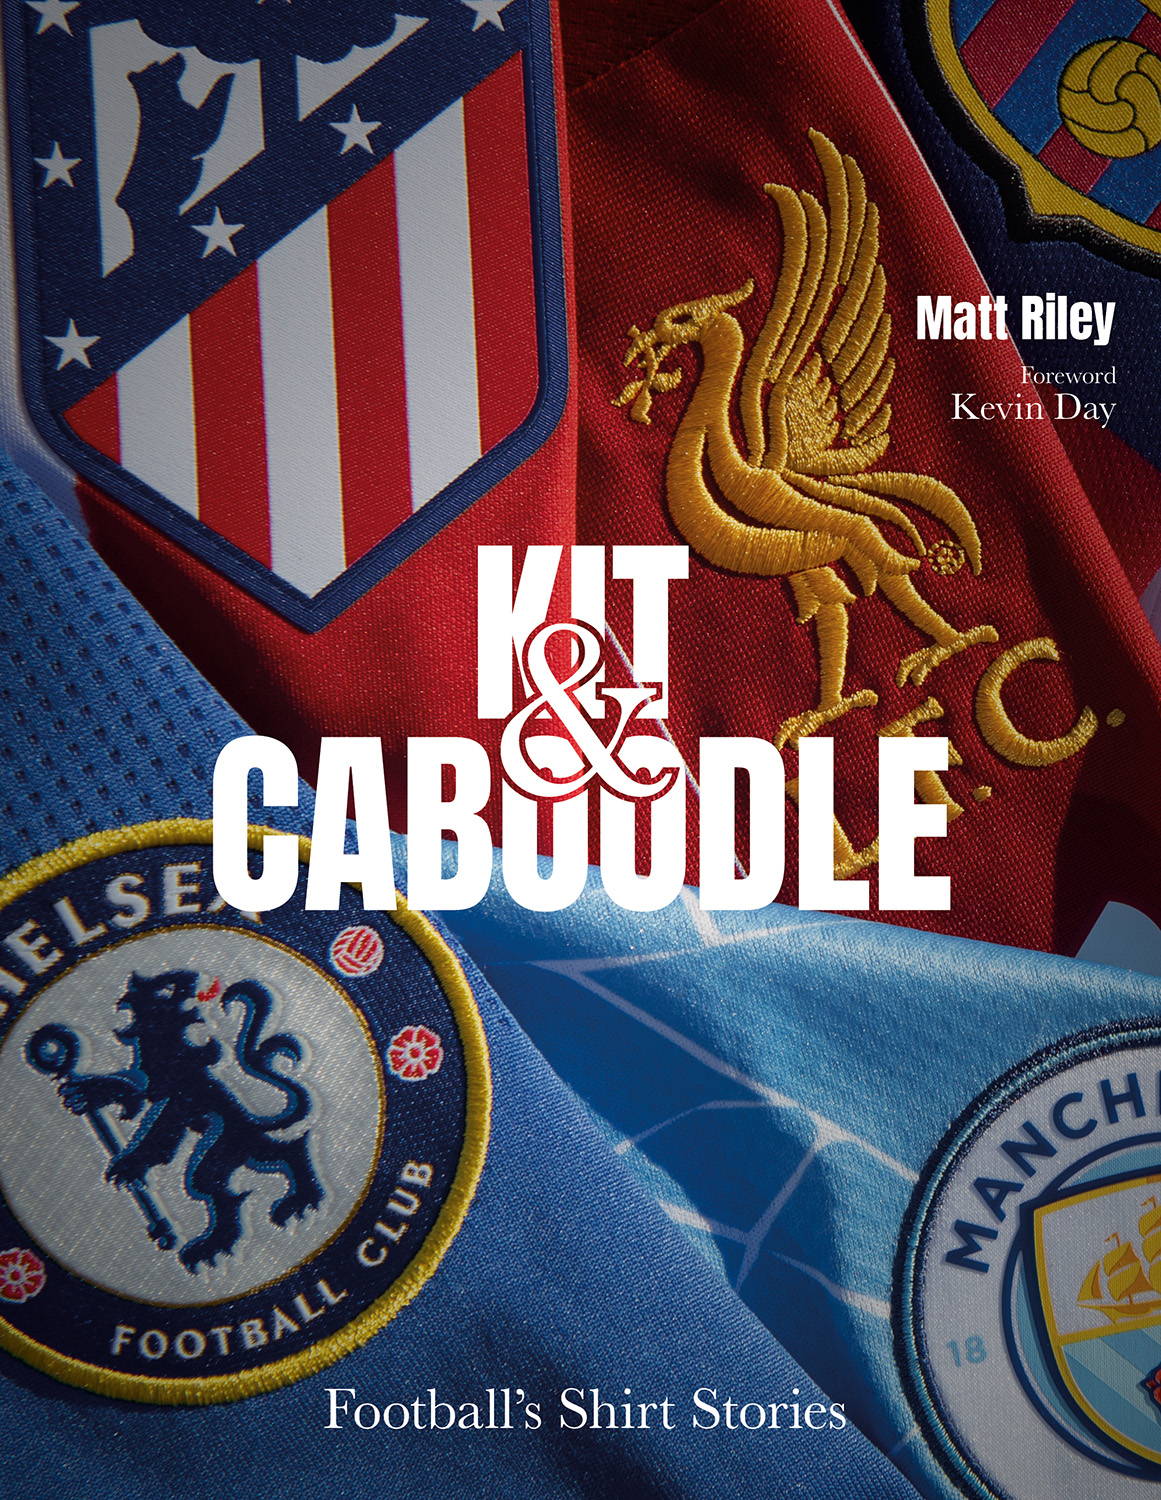 Kit and Caboodle